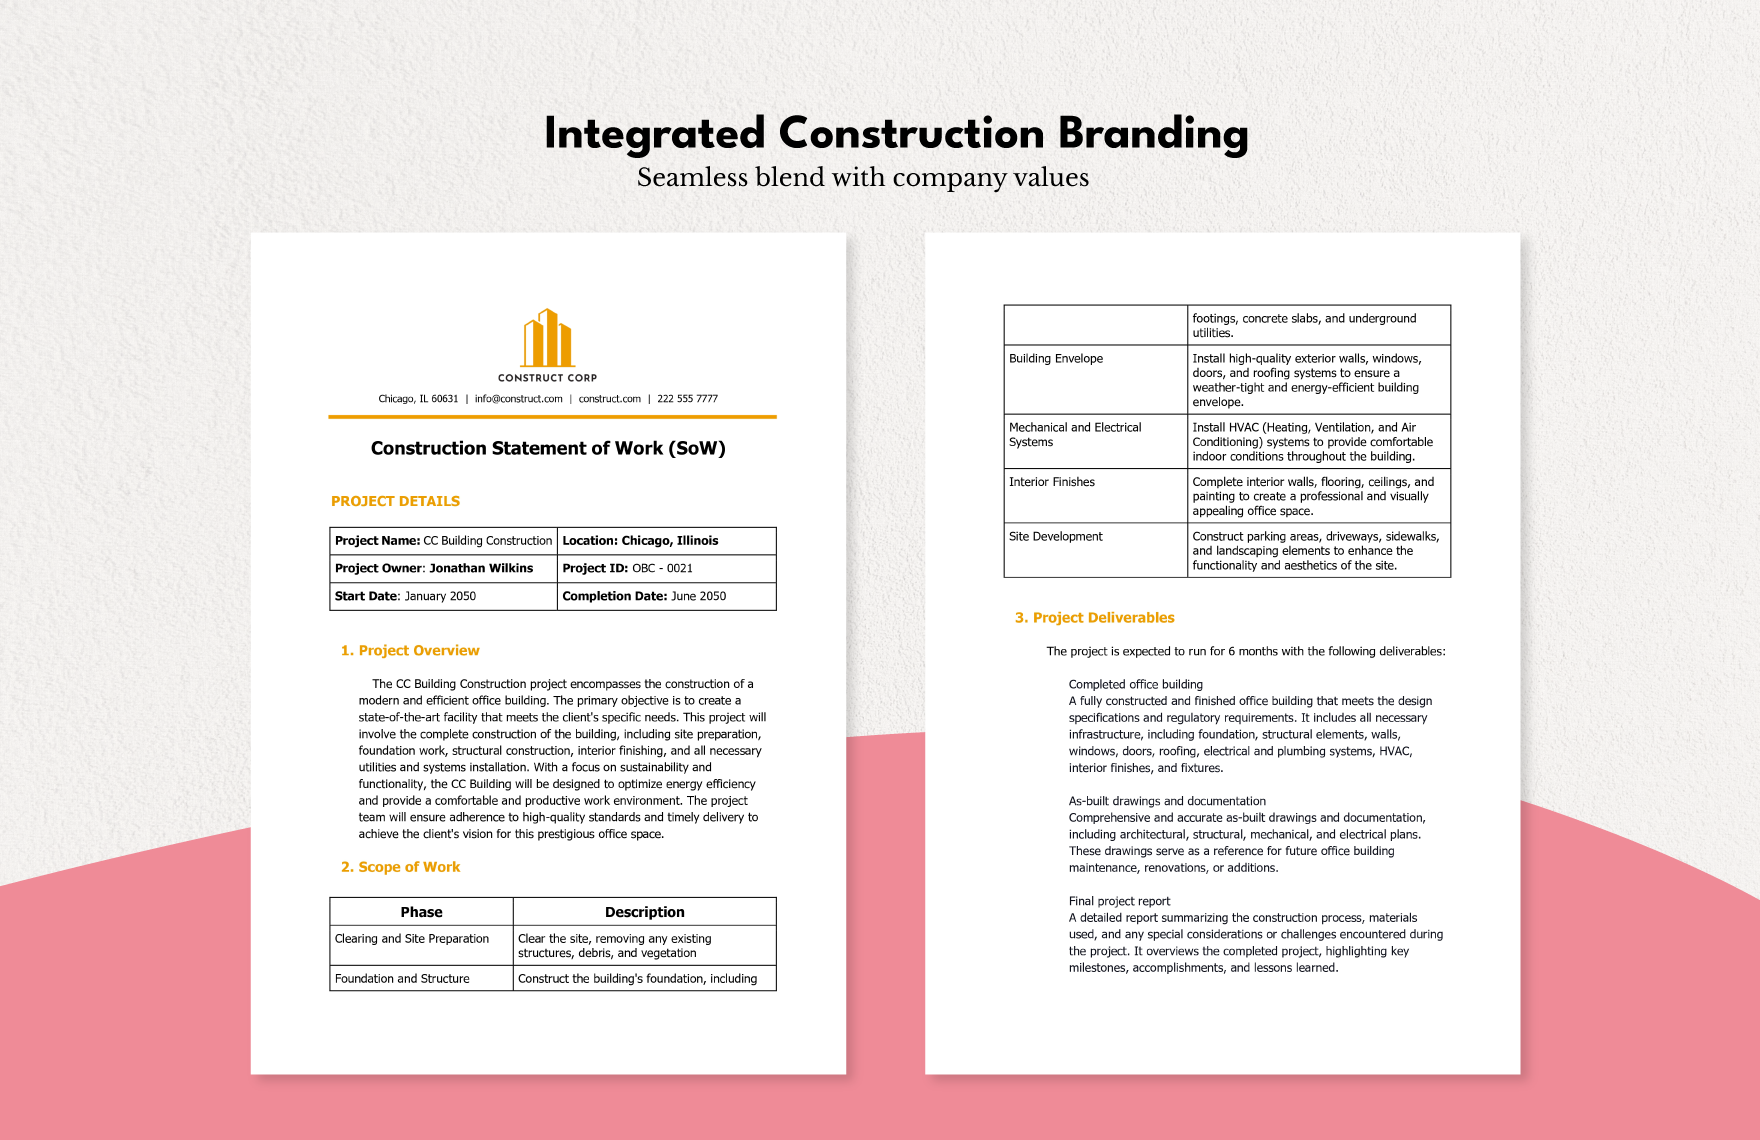 Construction Statement of Work (SoW) Template